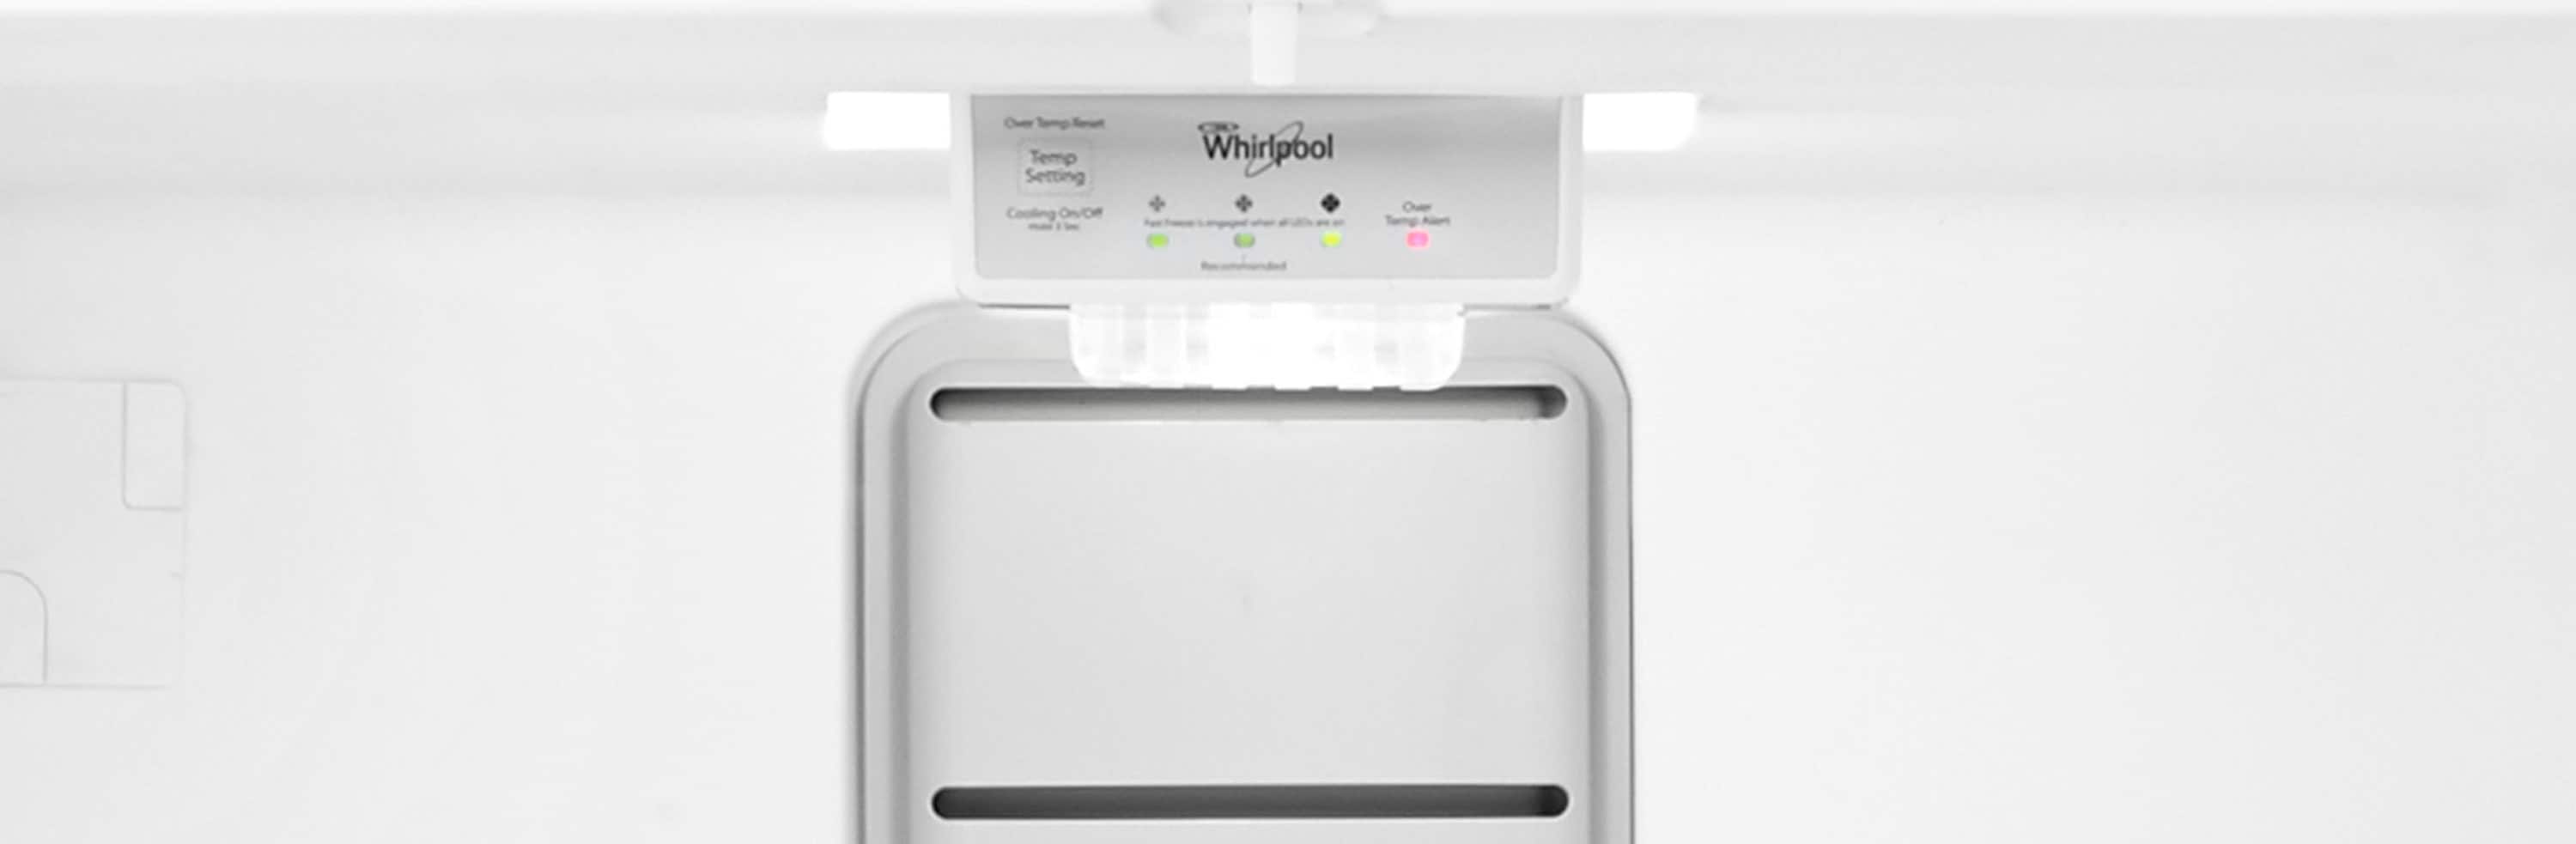 WZF79R20DW Whirlpool 20 cu. ft. Upright Freezer with Temperature Alarm -  White